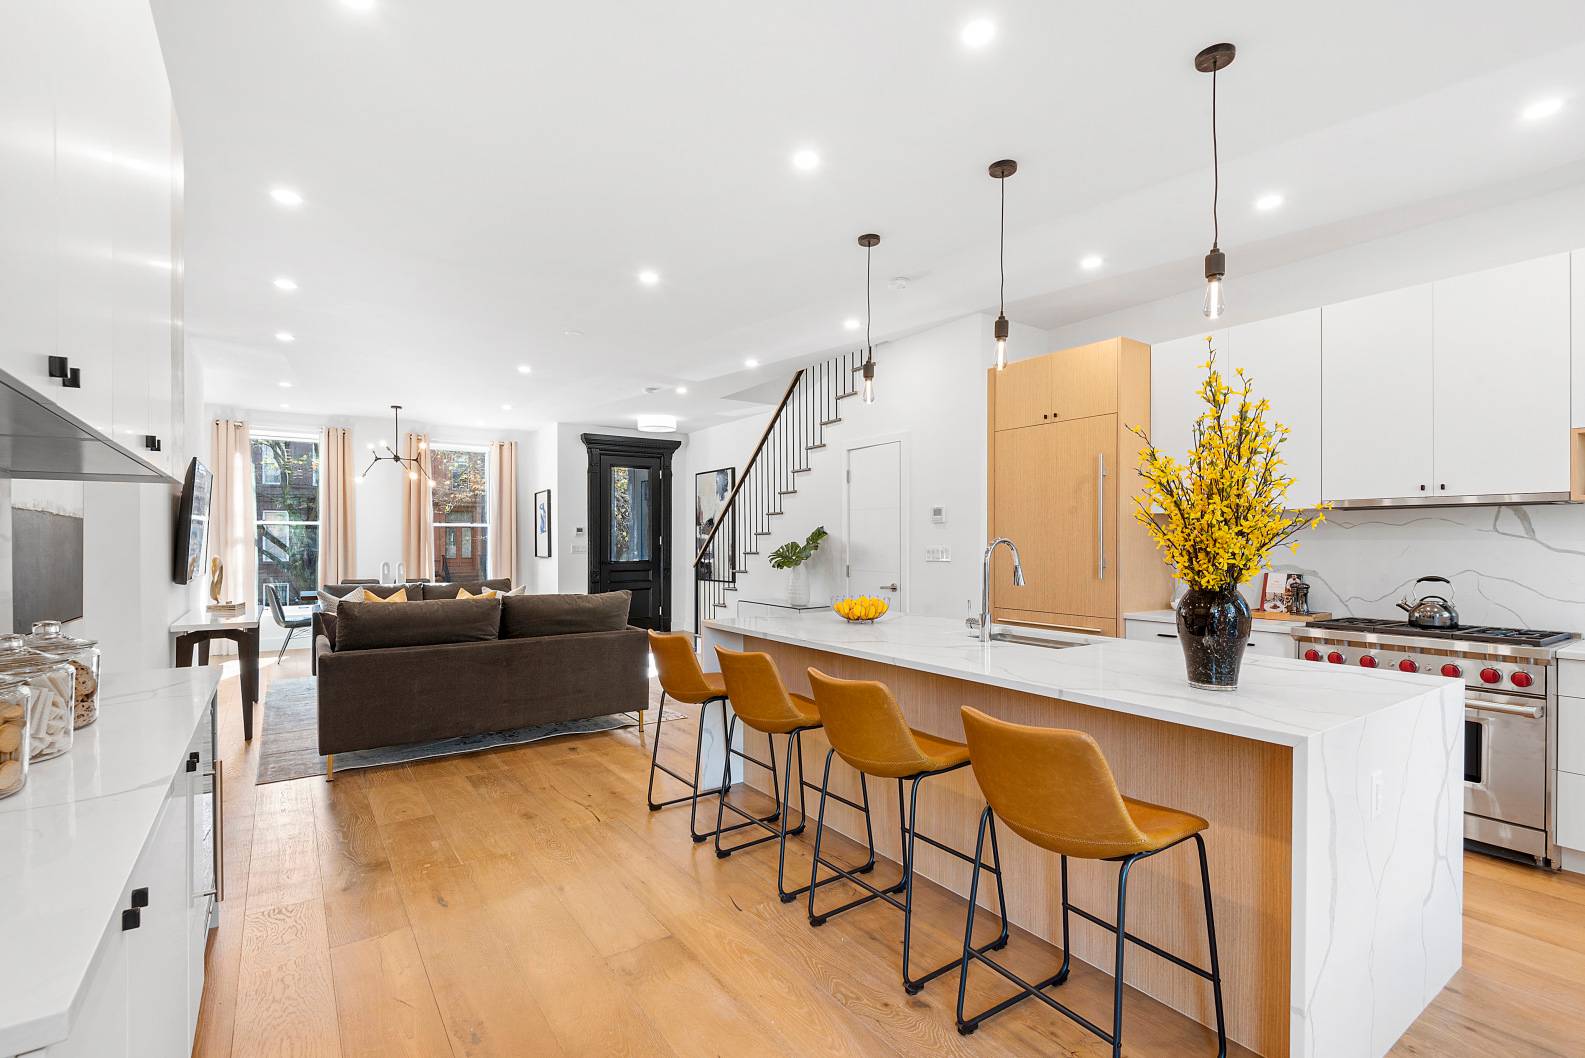 Gut renovated 3 family Brownstone on one of the best treelined blocks of Bedstuy Brooklyn.